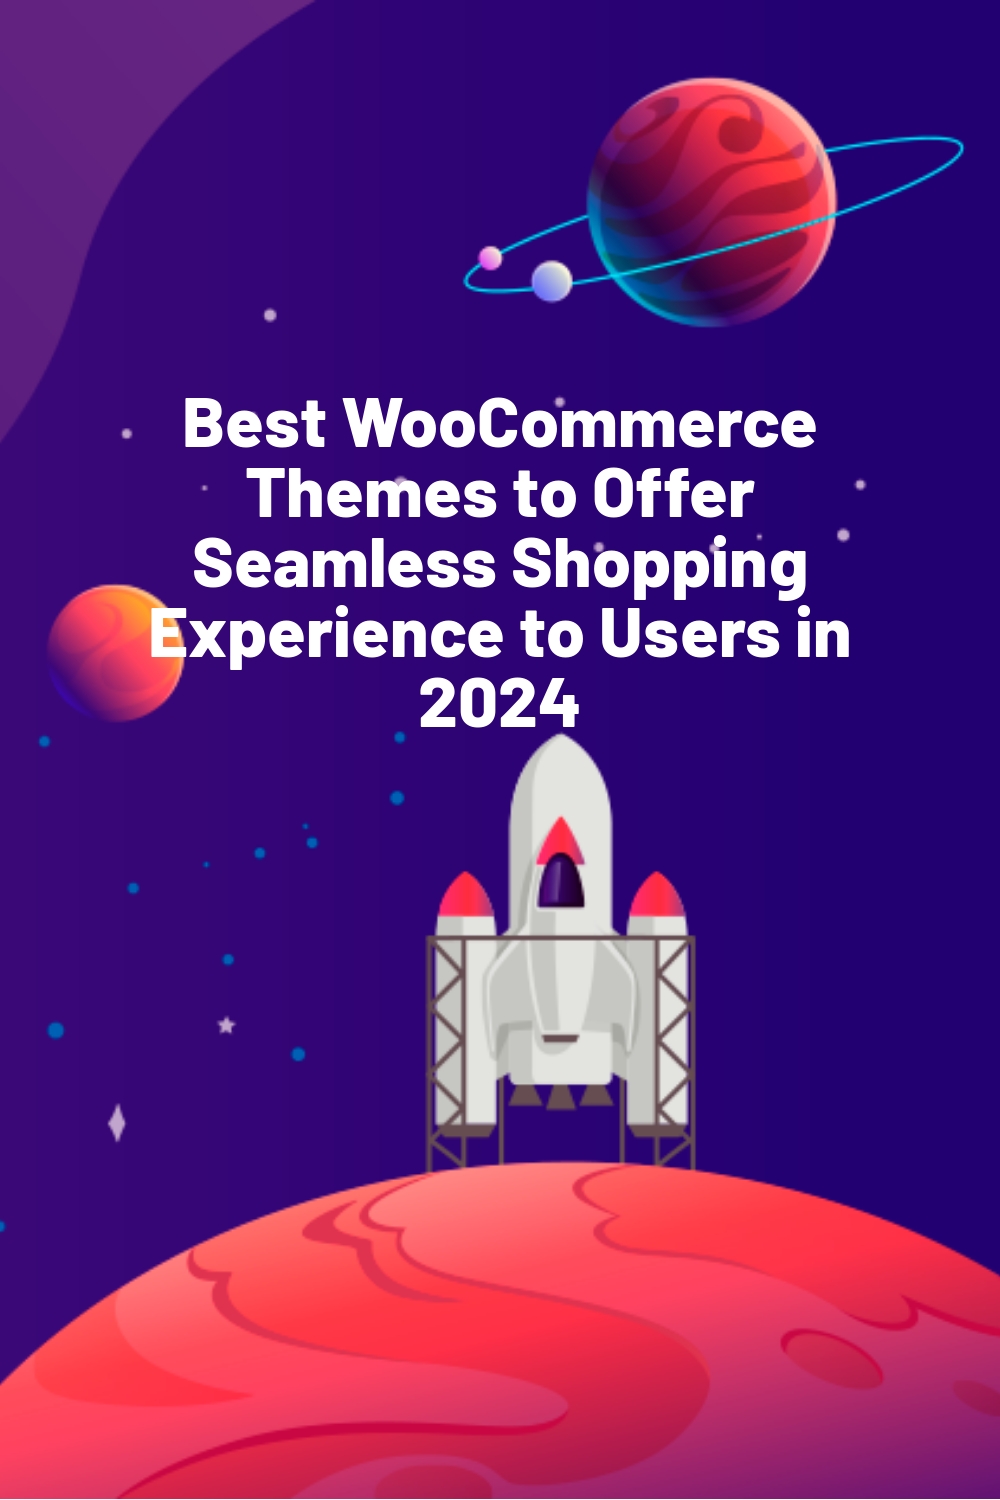 Best WooCommerce Themes to Offer Seamless Shopping Experience to Users in 2024